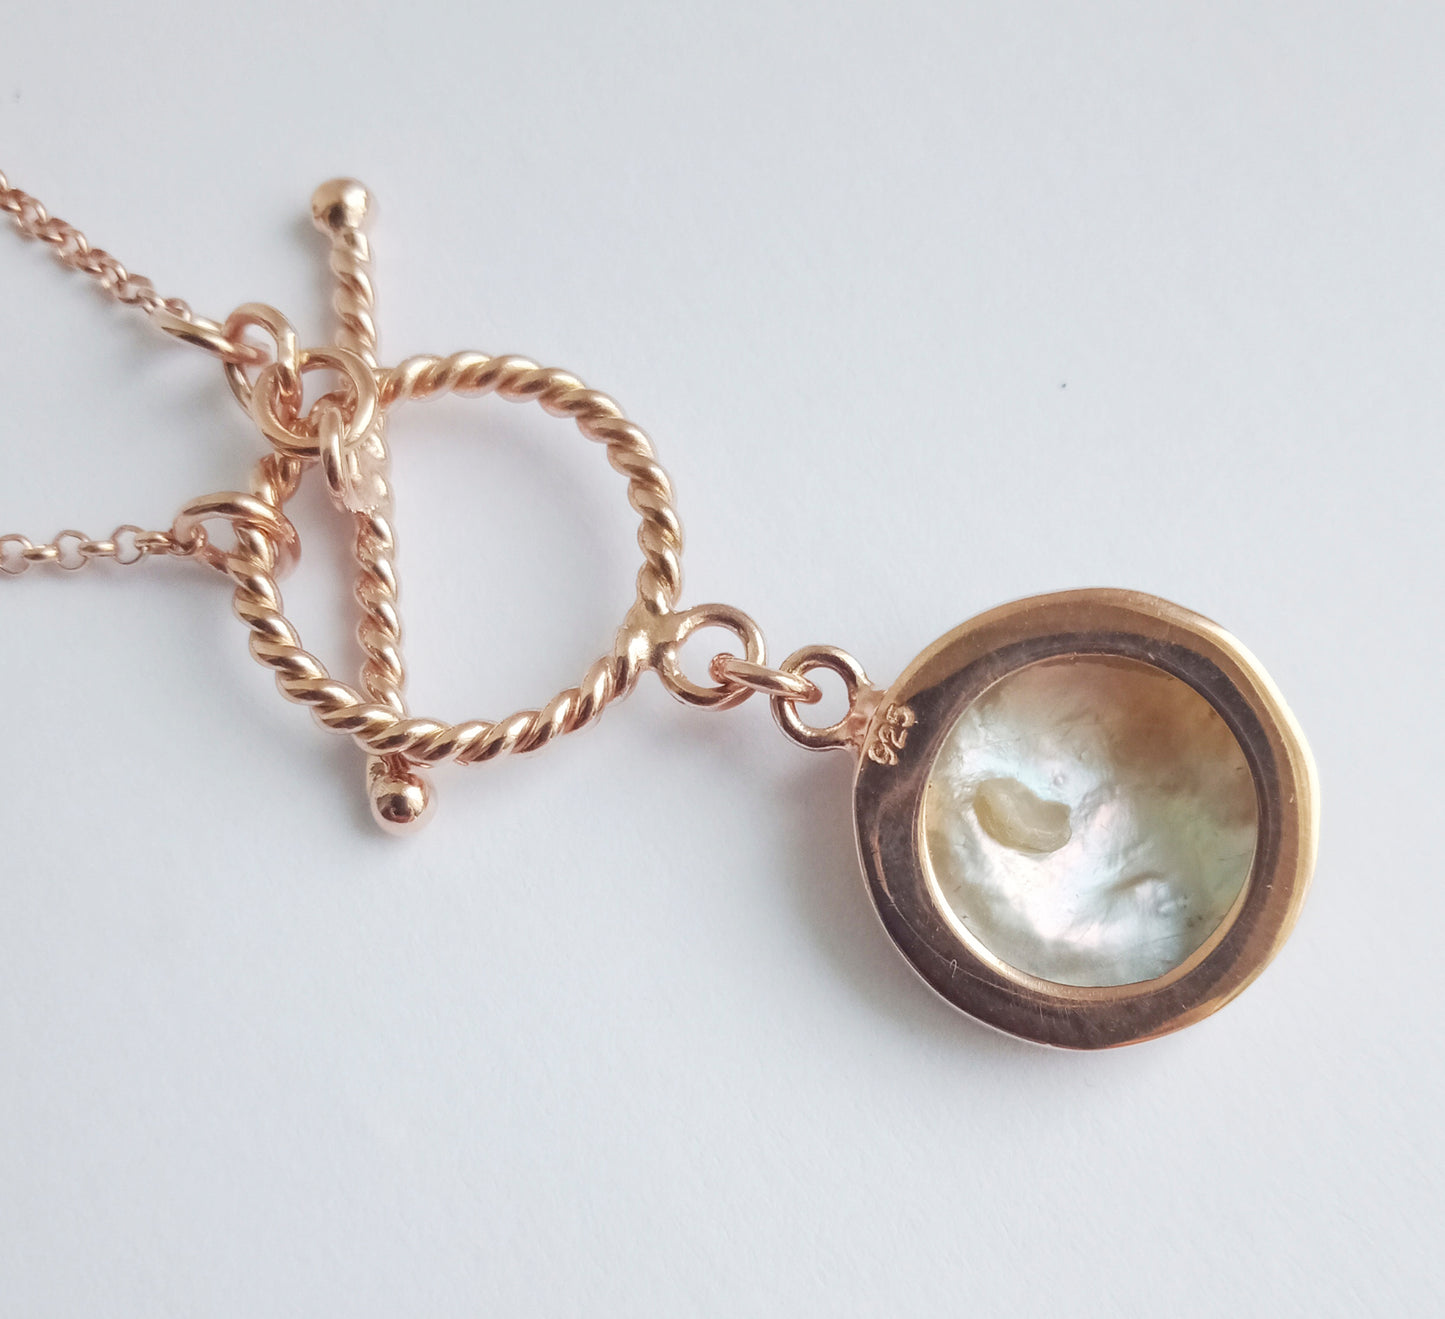 Rose Gold Fob Chain Necklace